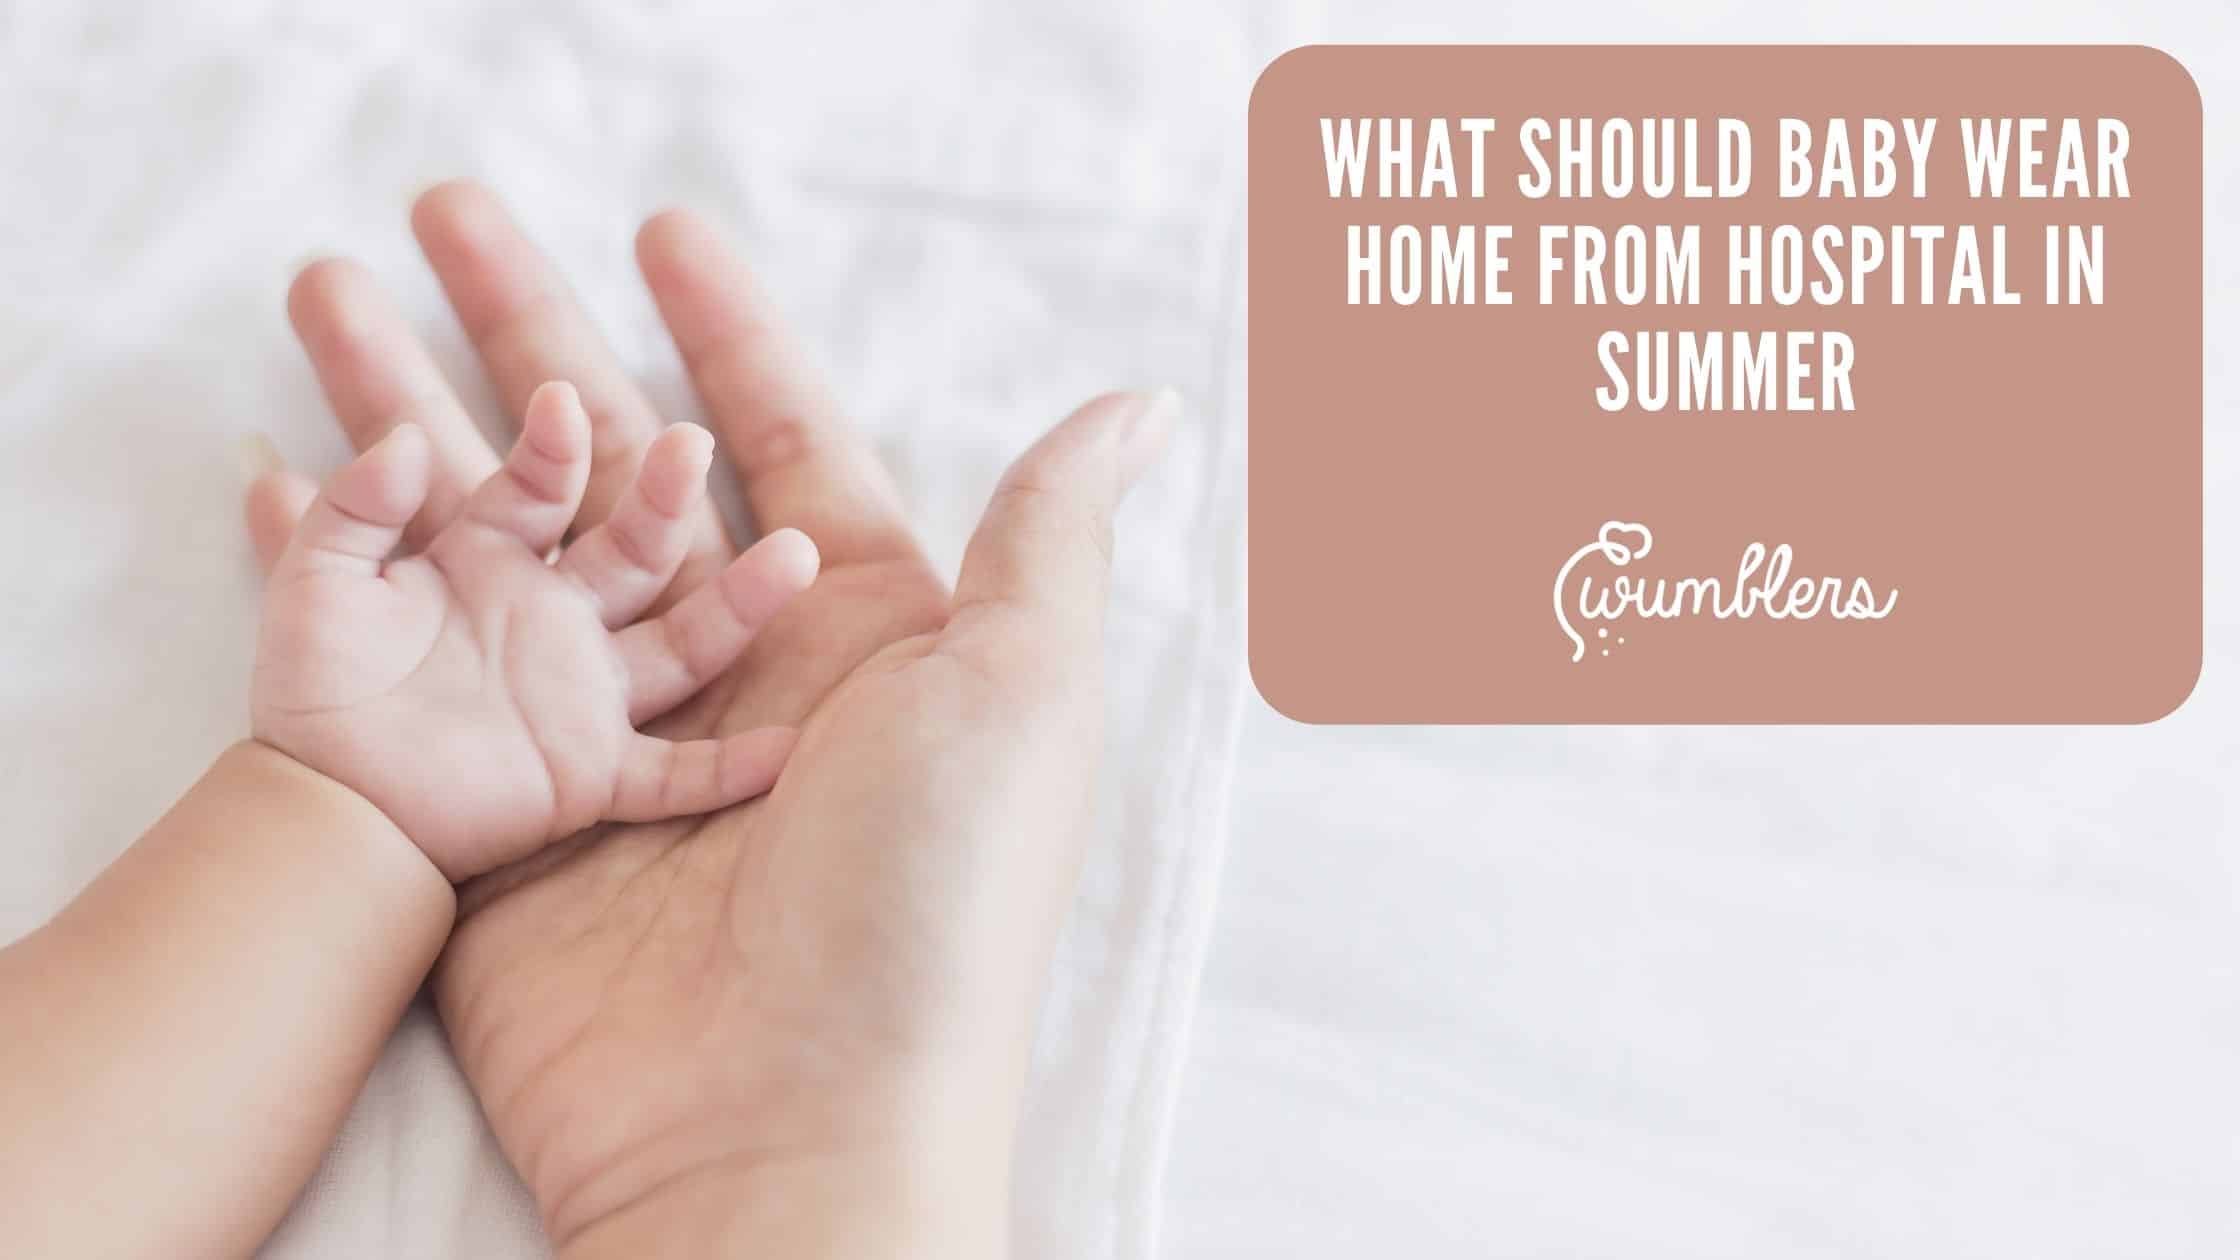 What Should Baby Wear Home From Hospital in Summer